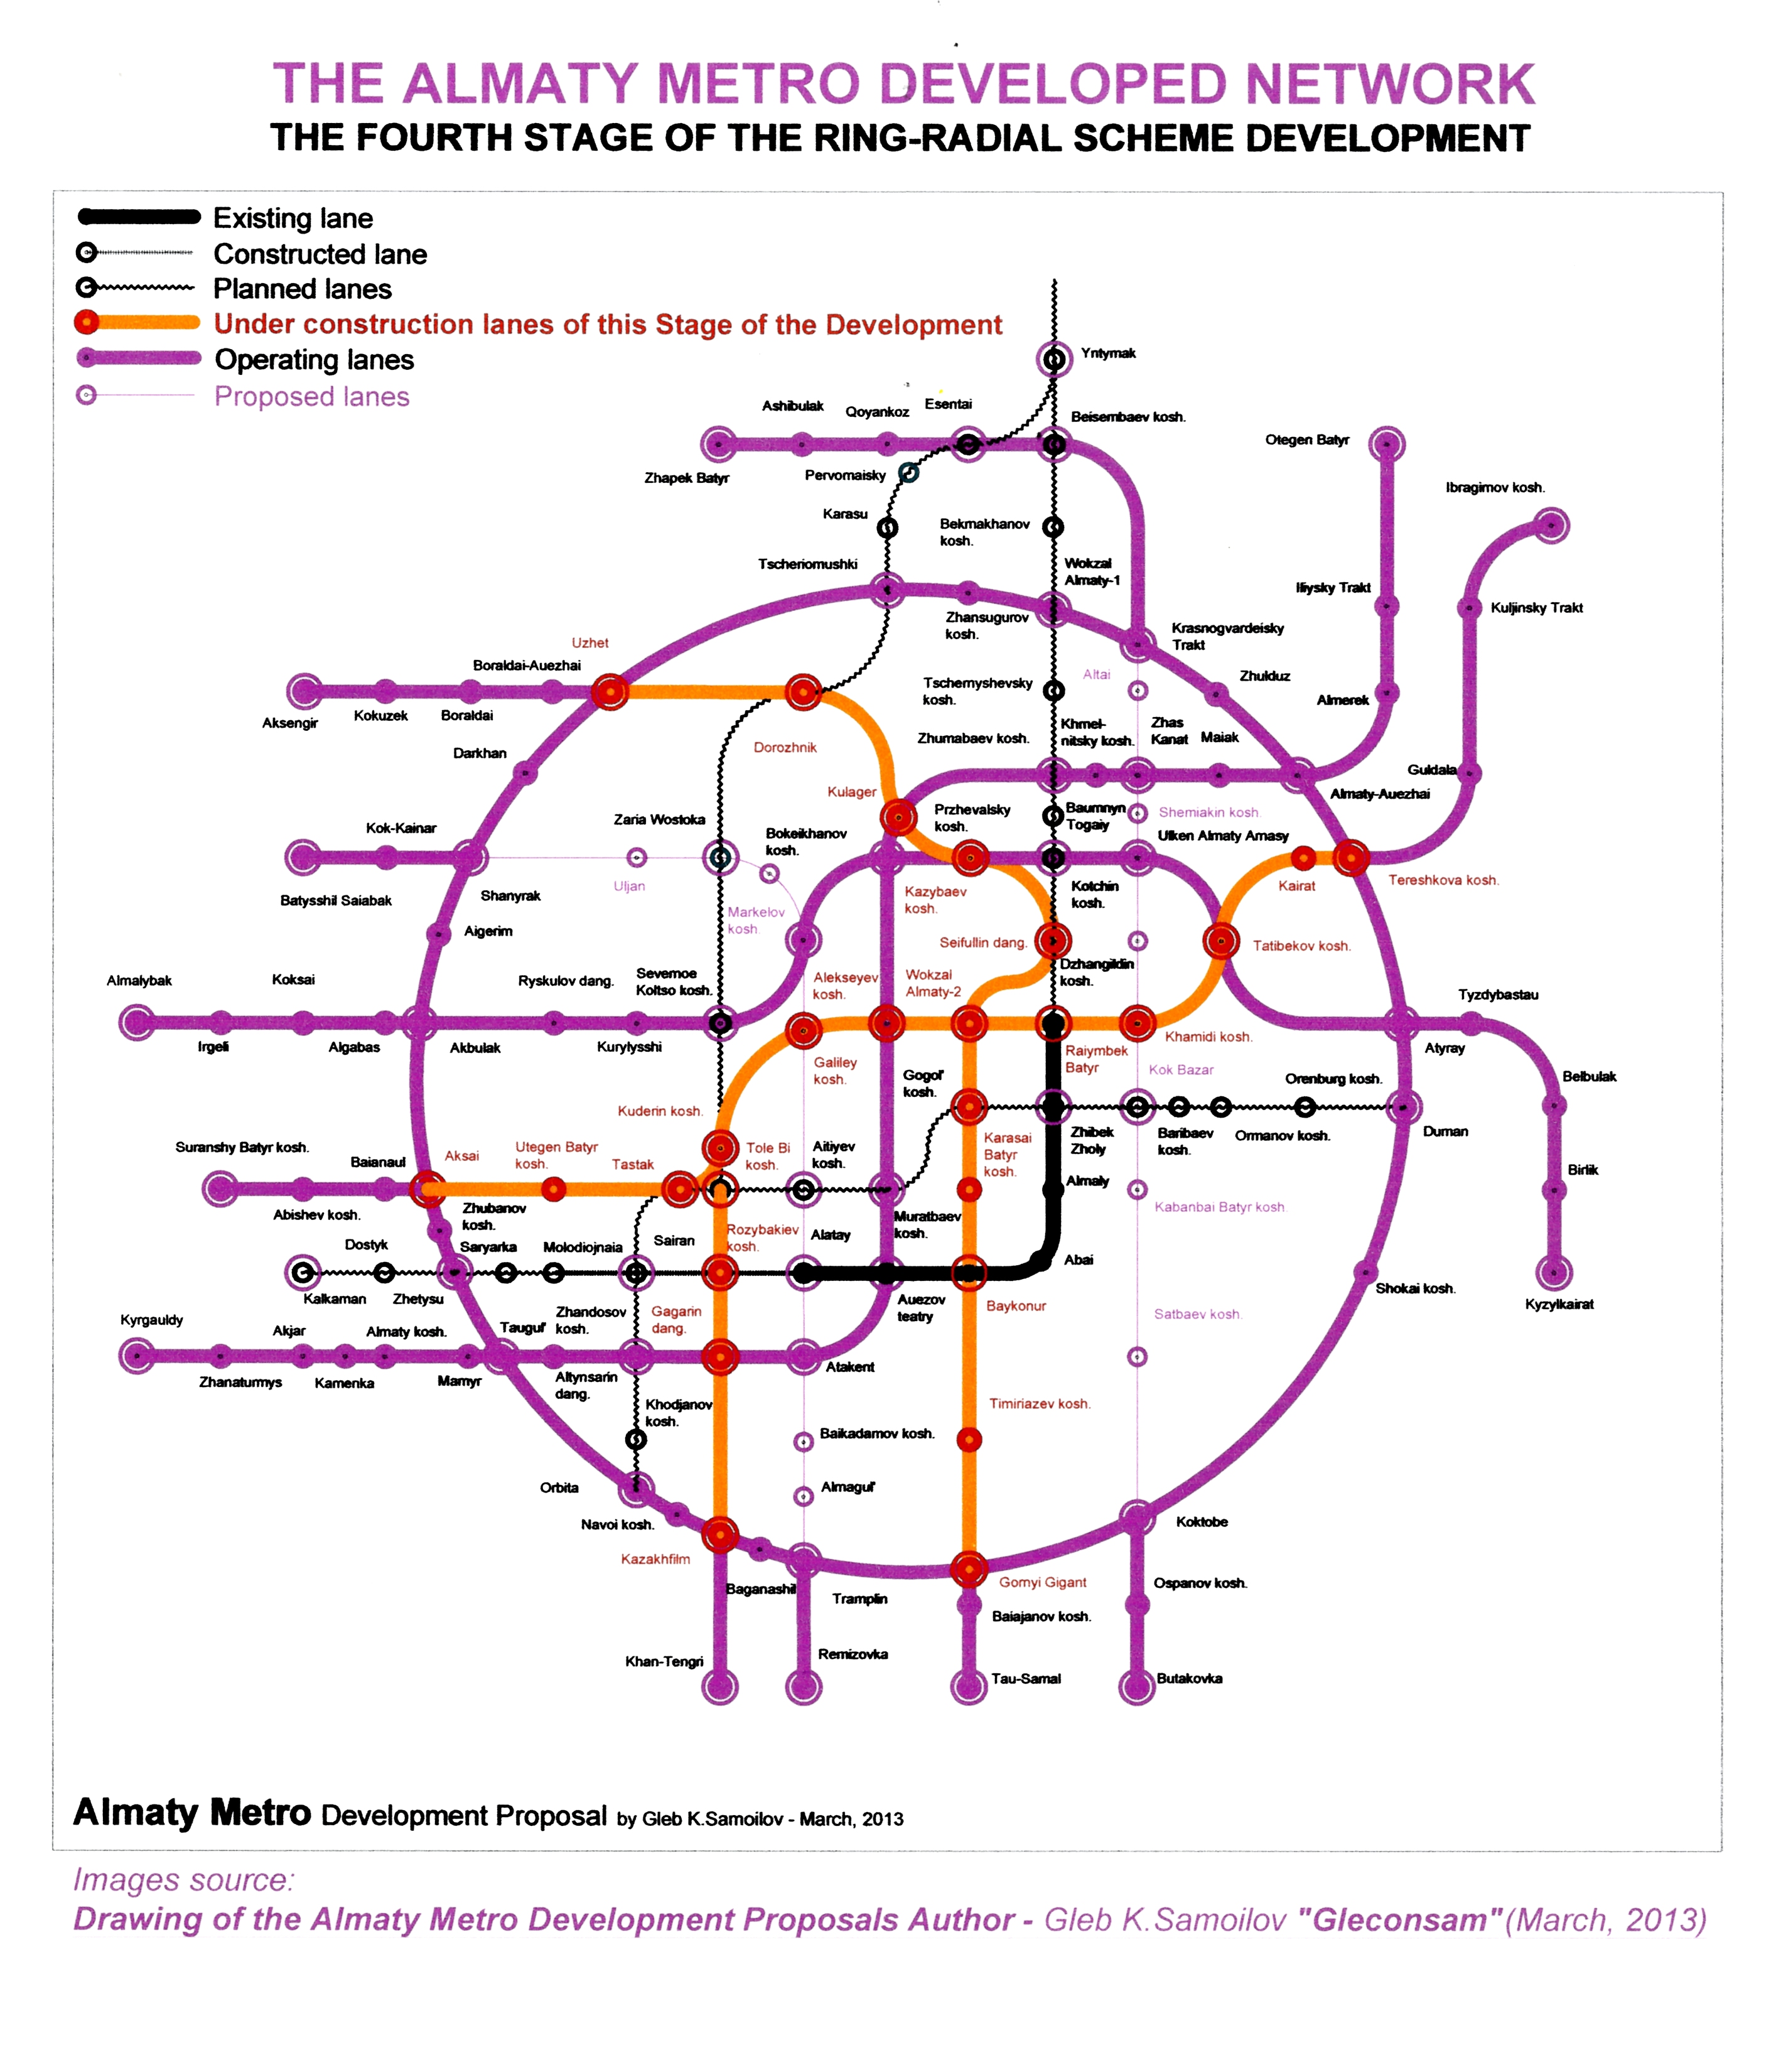 THE ALMATY METRO – the Fourth Stage of the proposed Ring-Radial scheme development  